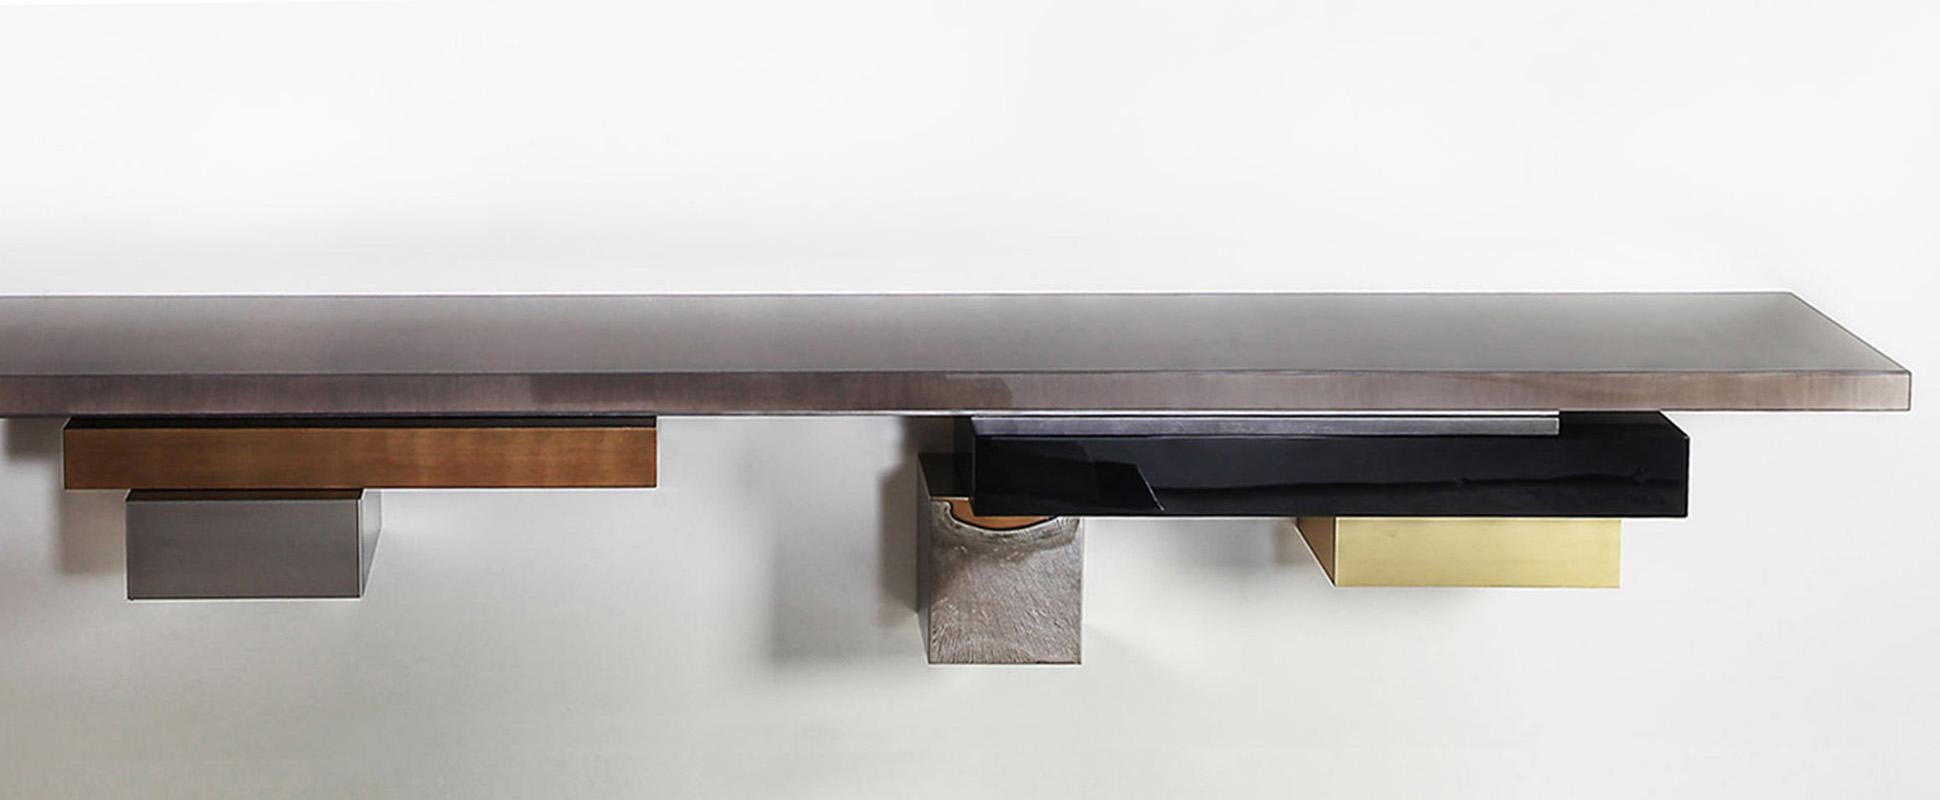 Stratos L, Console - Wall mounted from the STRATOS LINE
The asymmetrical composition for this console is a wild yet harmonious combination of several metals, wood and lacquer.

Materials: 
Tinted Gray Sycamore 100 % glossy
Hand patinated silver